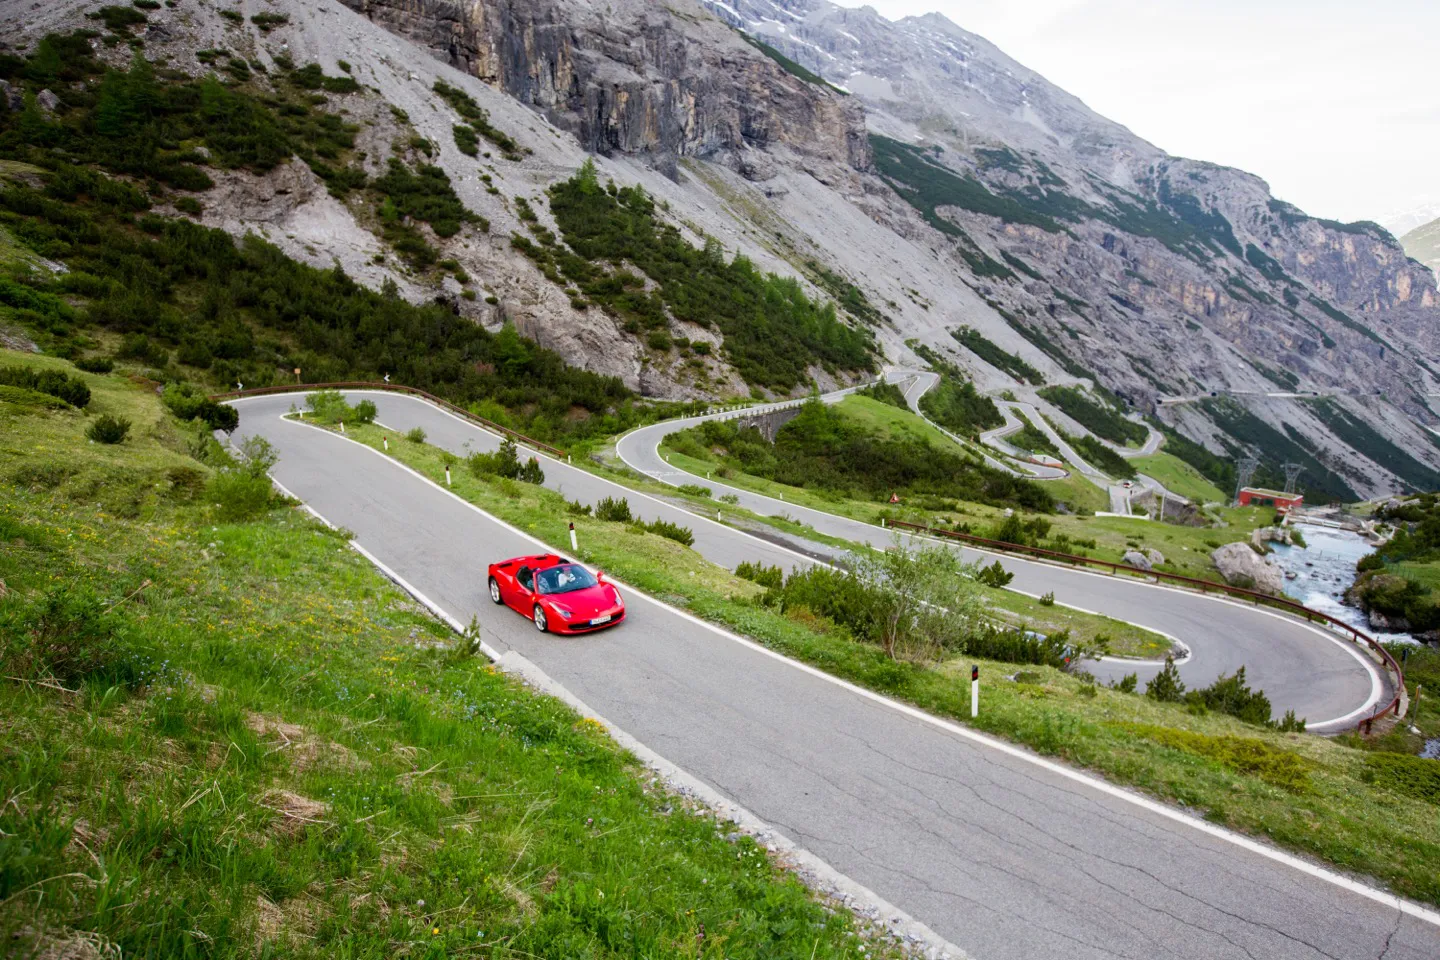 Enjoy a luxury self drive tour of Germany and Austria in a Ferrari